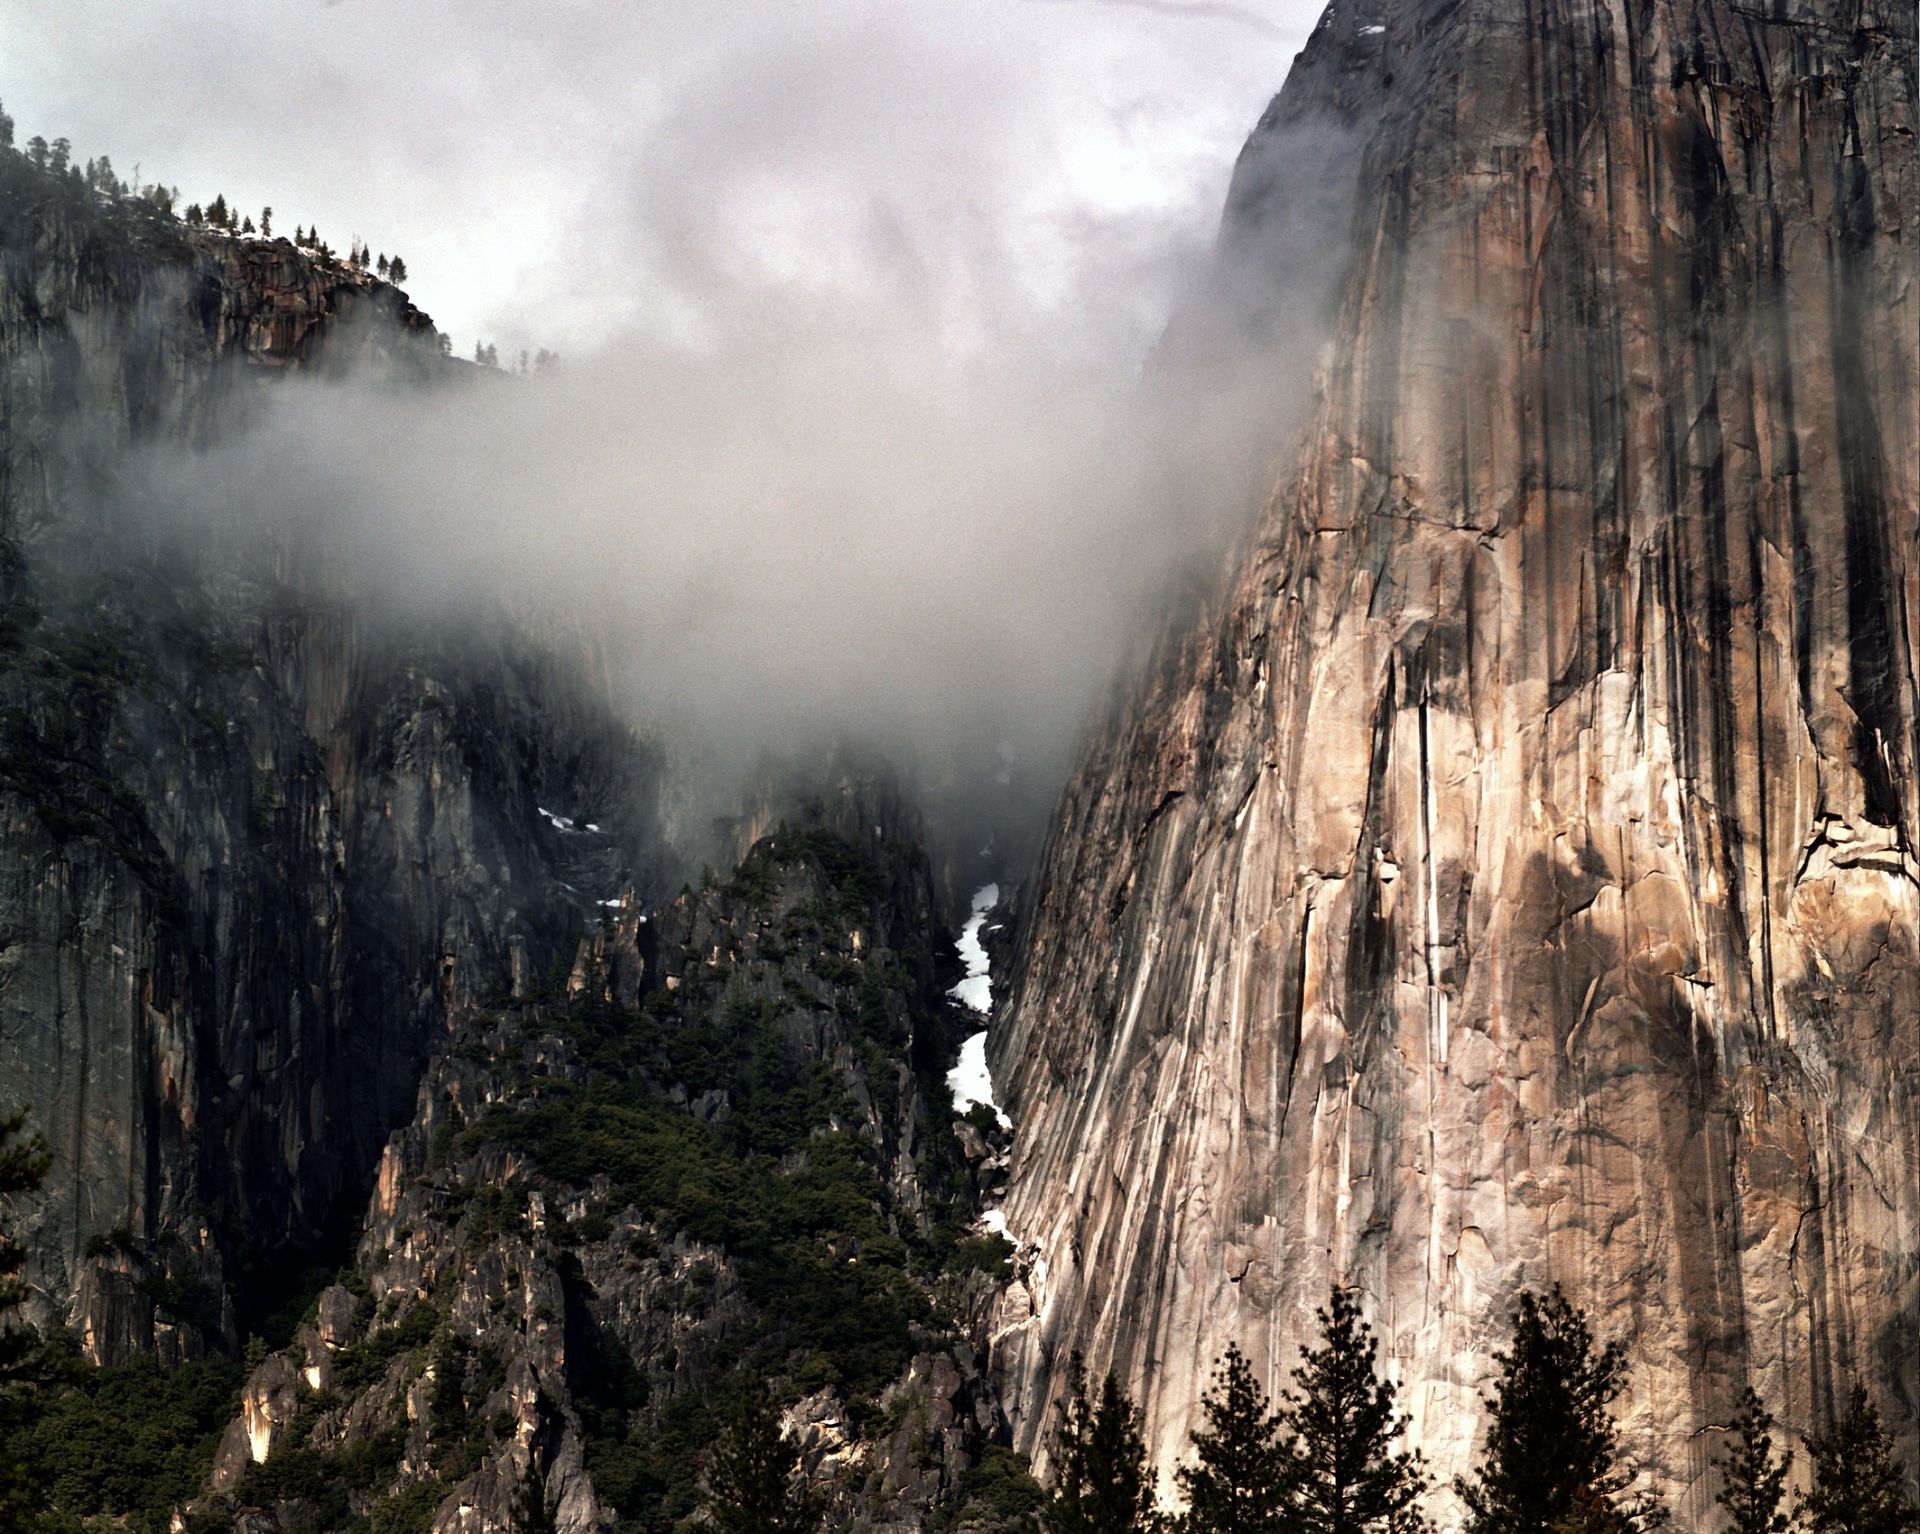 An image of cliffs in Yosemite National Park.